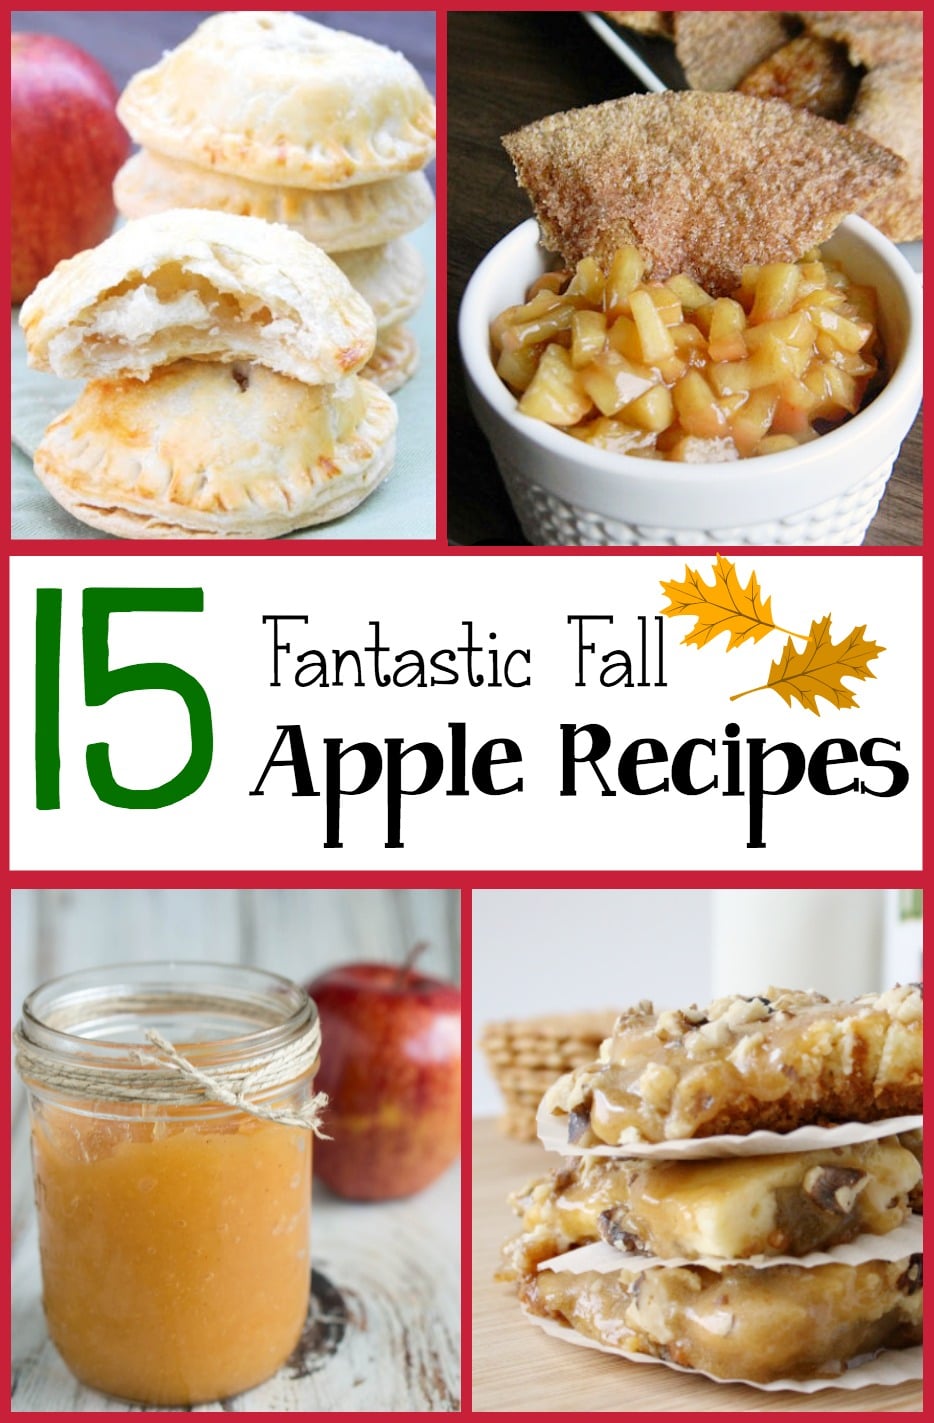 A round-up of 15 delicious recipes using apples - perfect for fall!